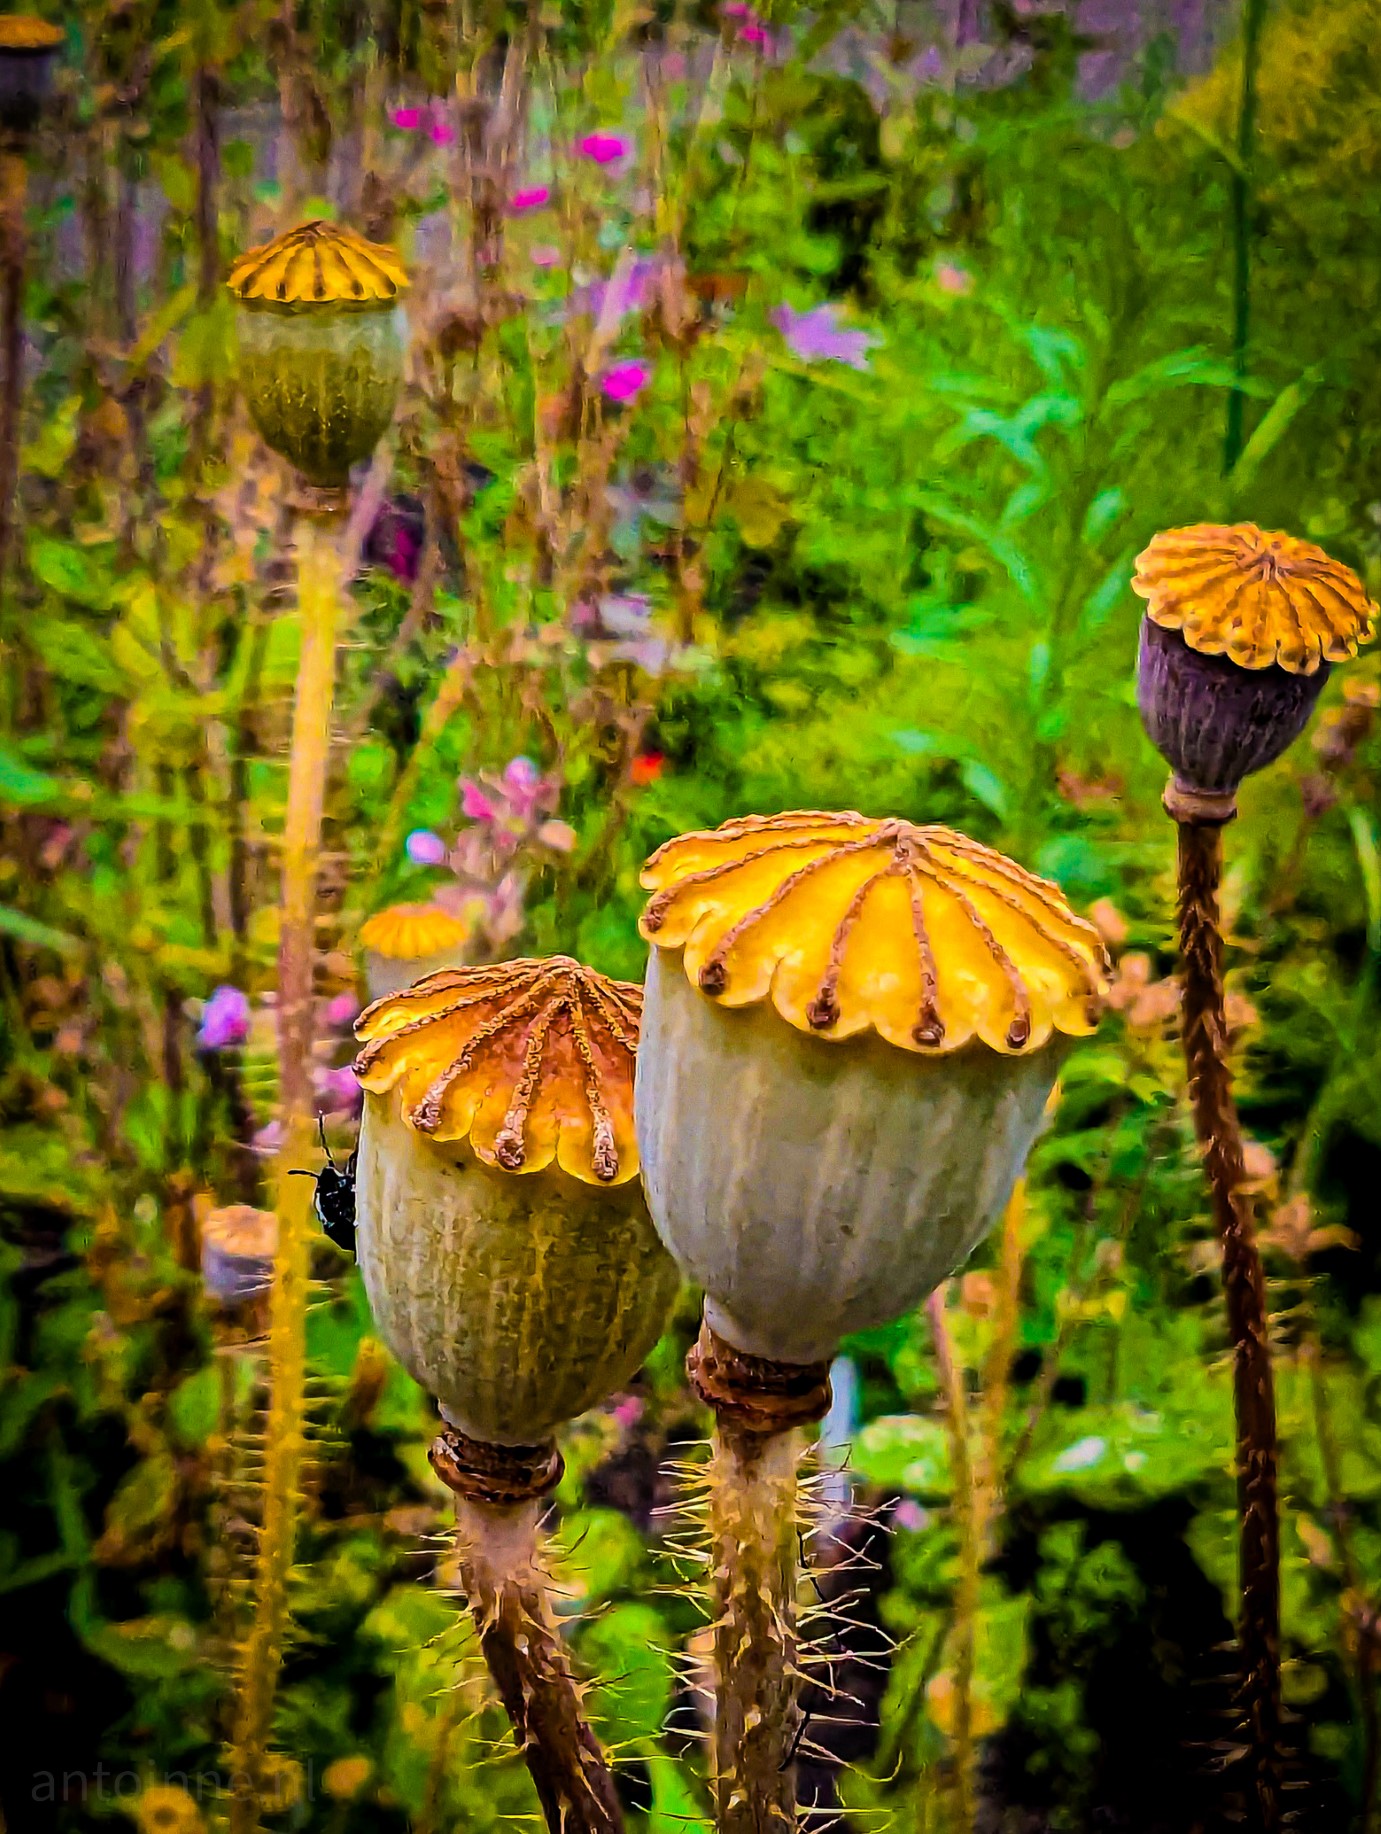 Seed pods in a flower-filled garden